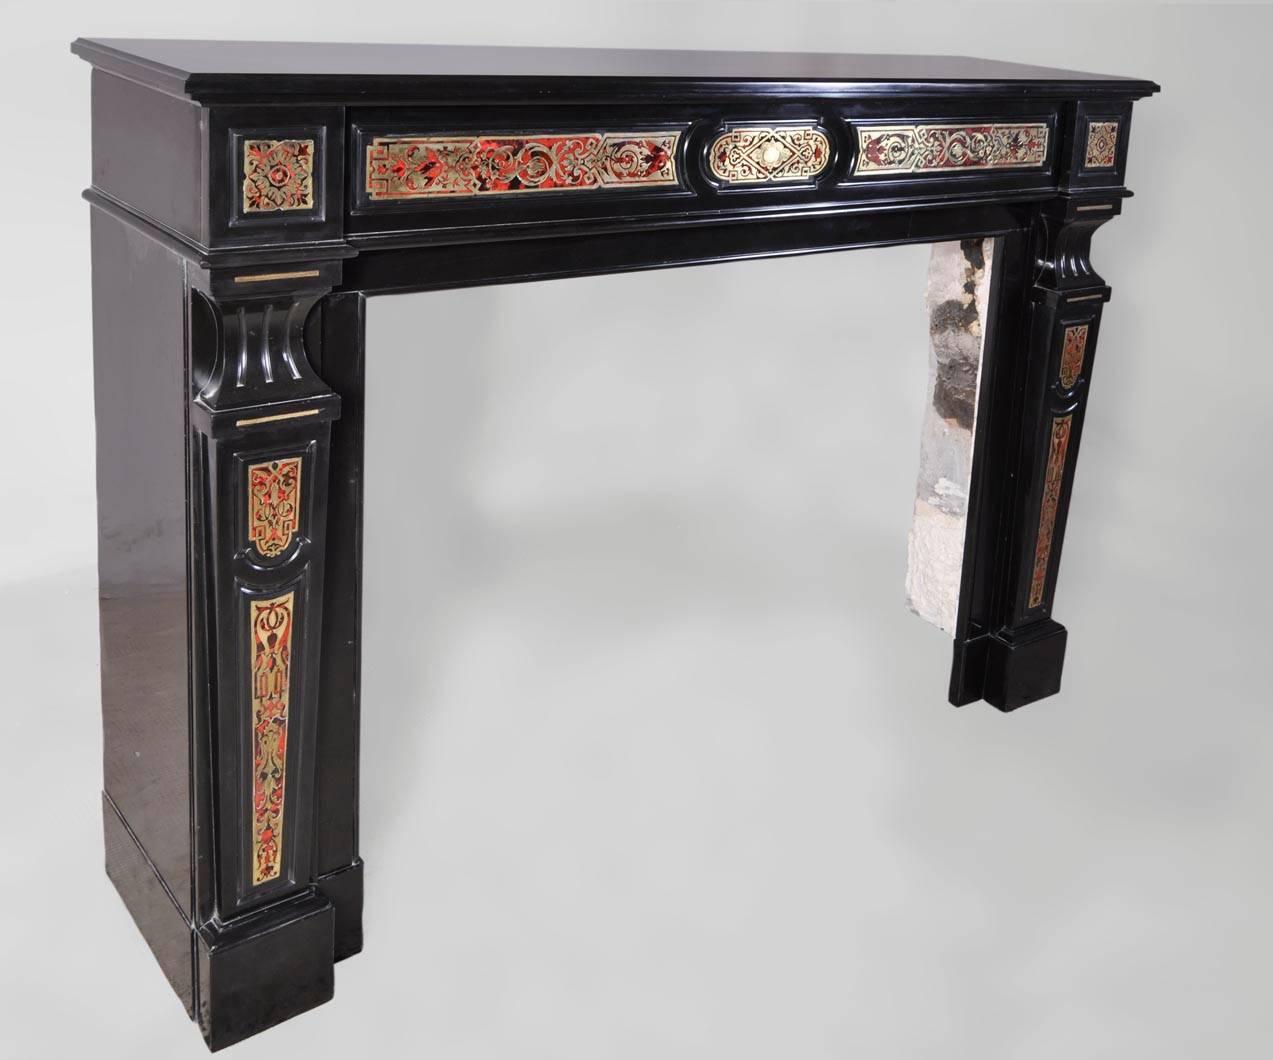 Carved Napoleon III Period Fireplace in Black from Belgium Marble and Boulle Marquetry